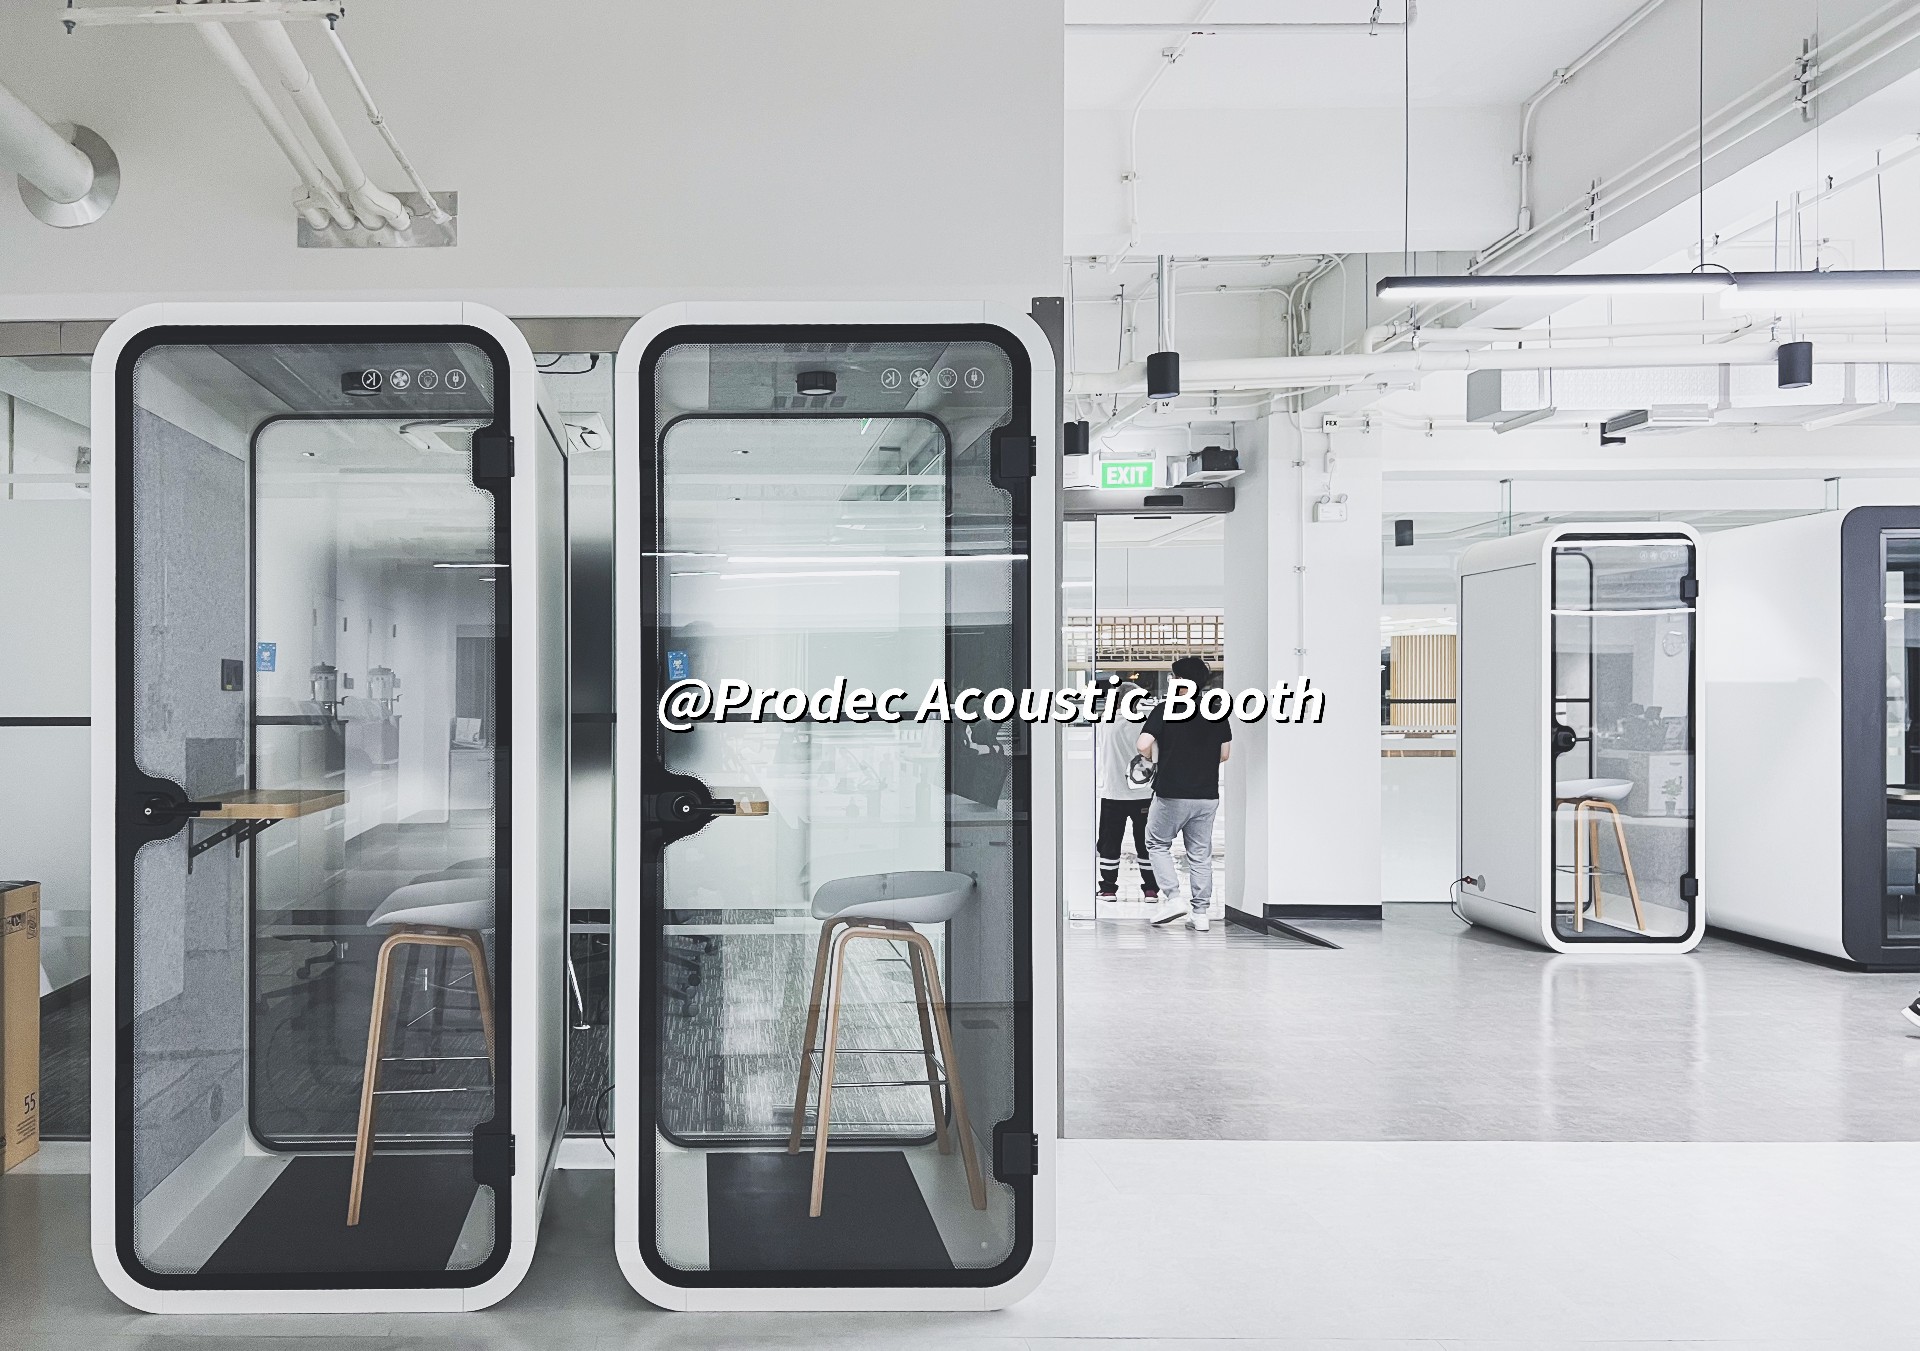 Toyota Thailand Headquarters Enhances Open Workspace with Our Soundproof Phone Booths